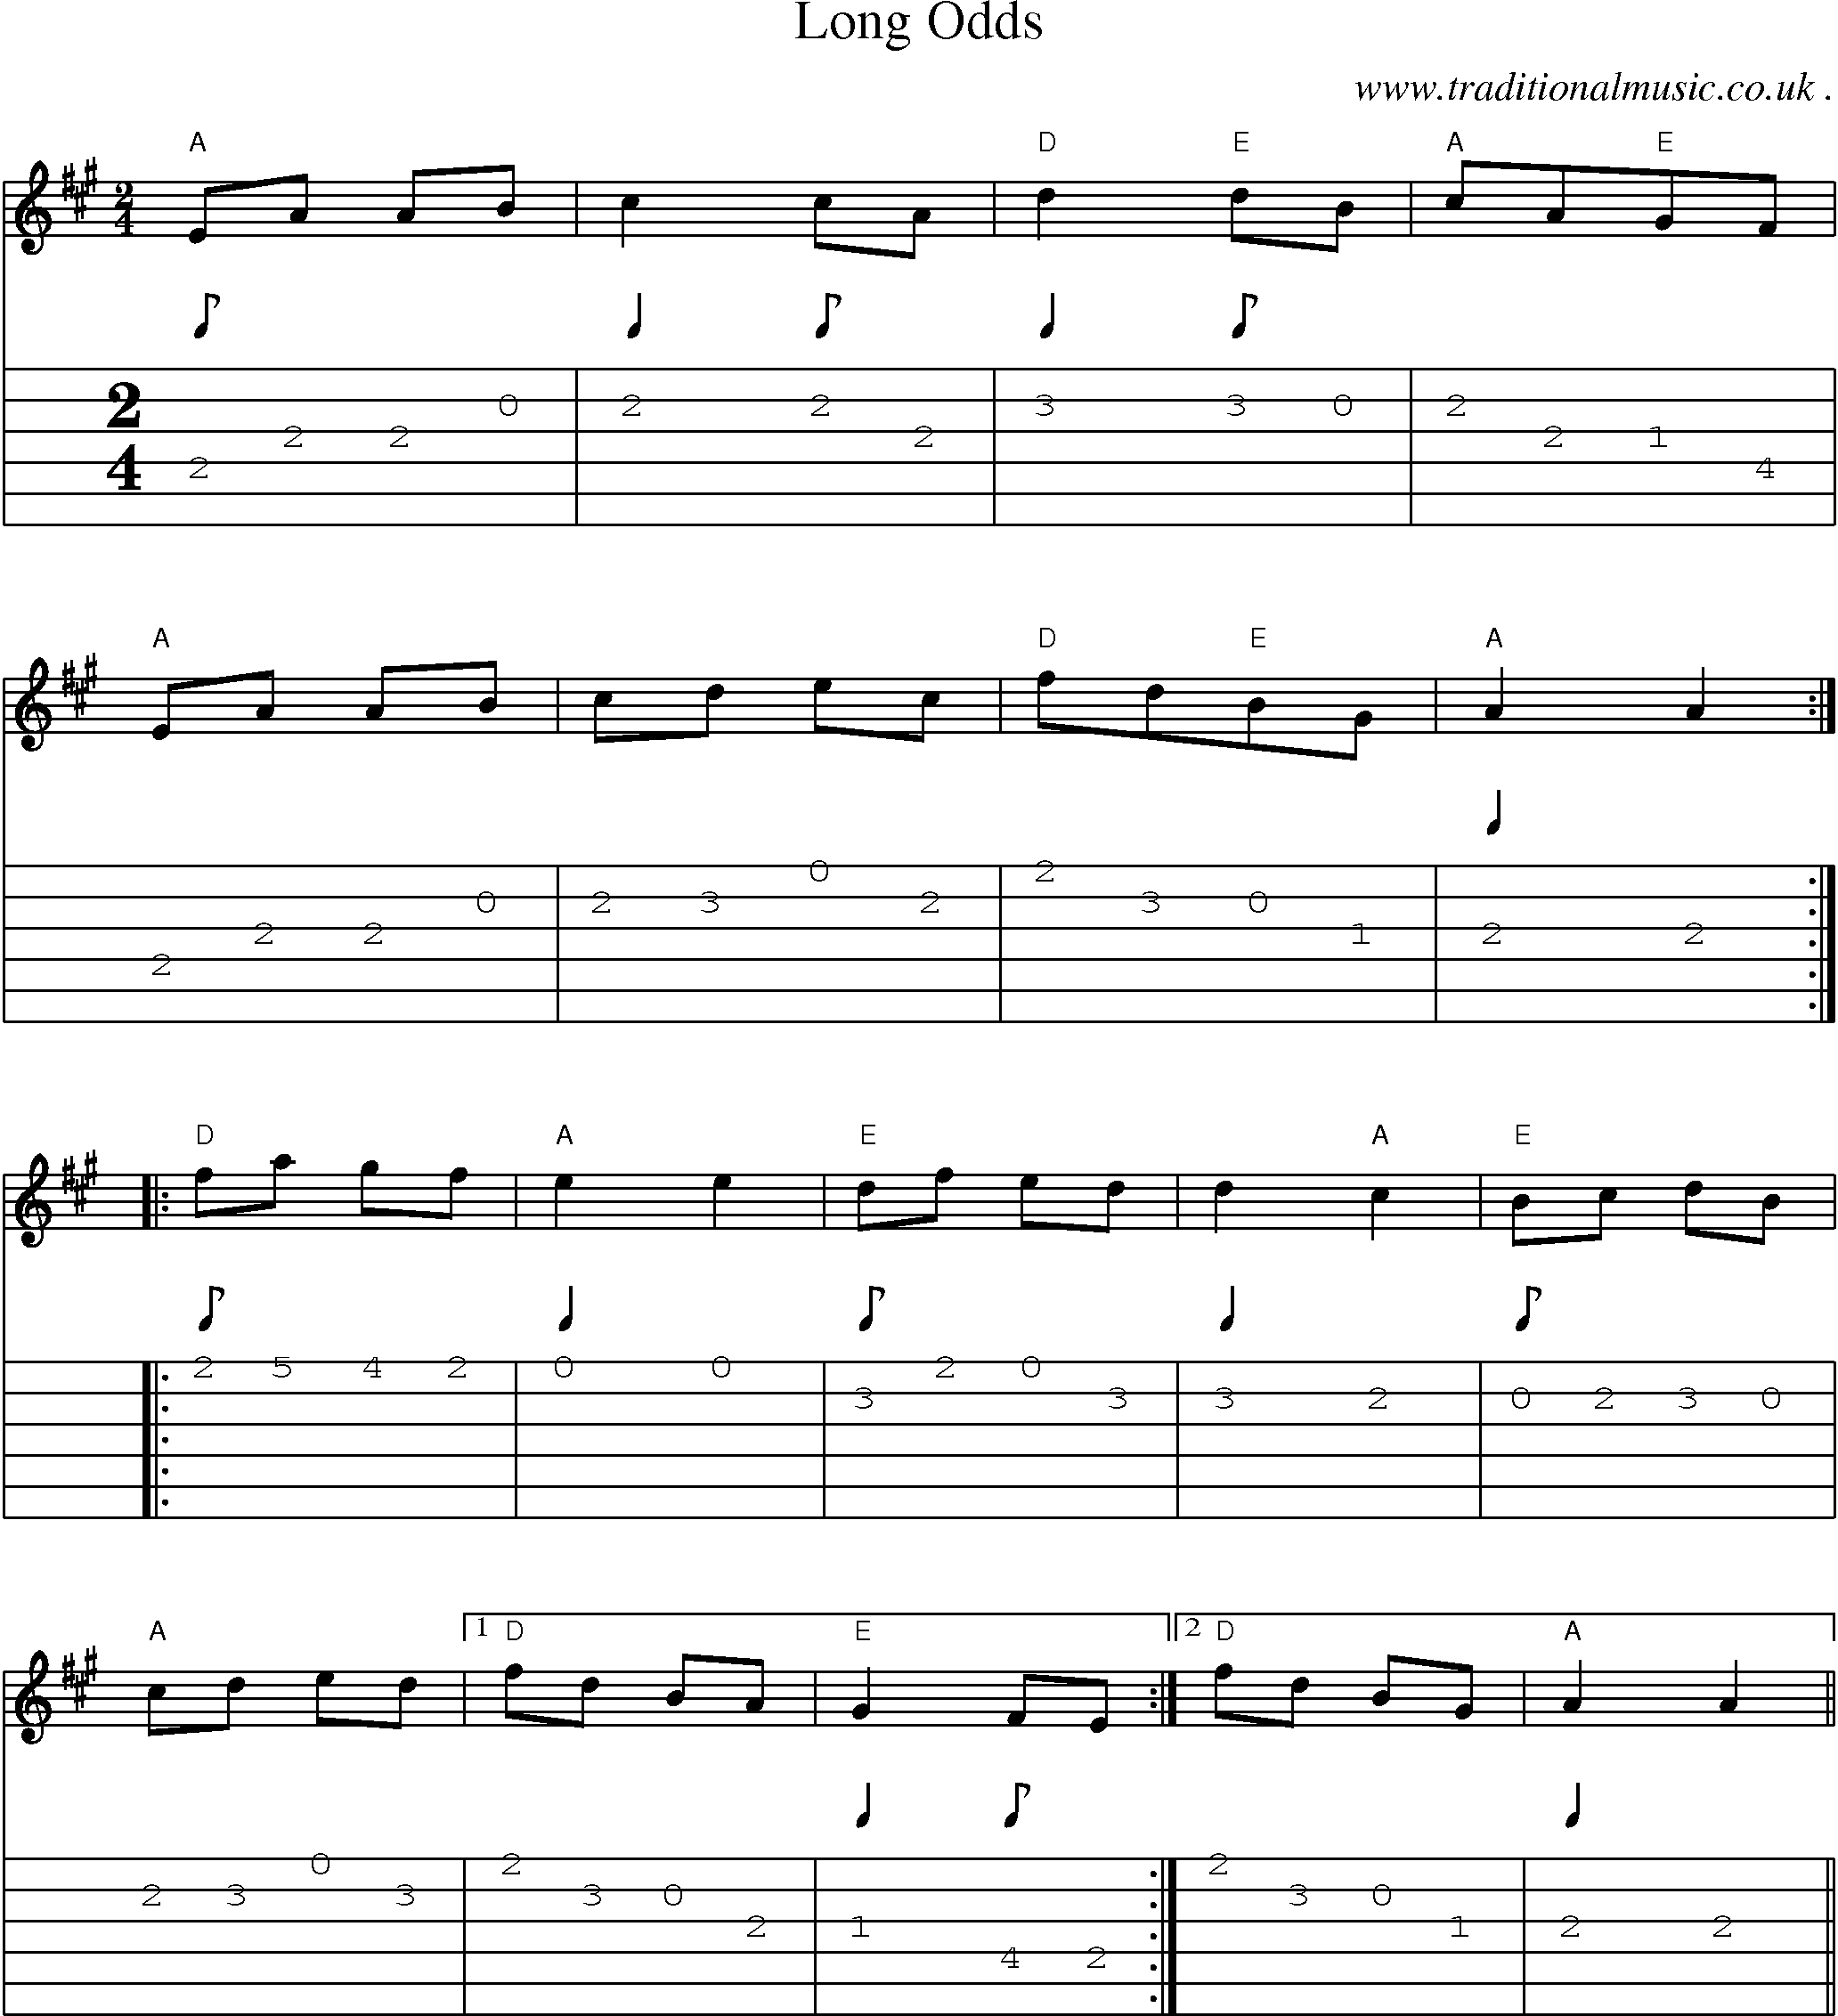 Sheet-Music and Guitar Tabs for Long Odds